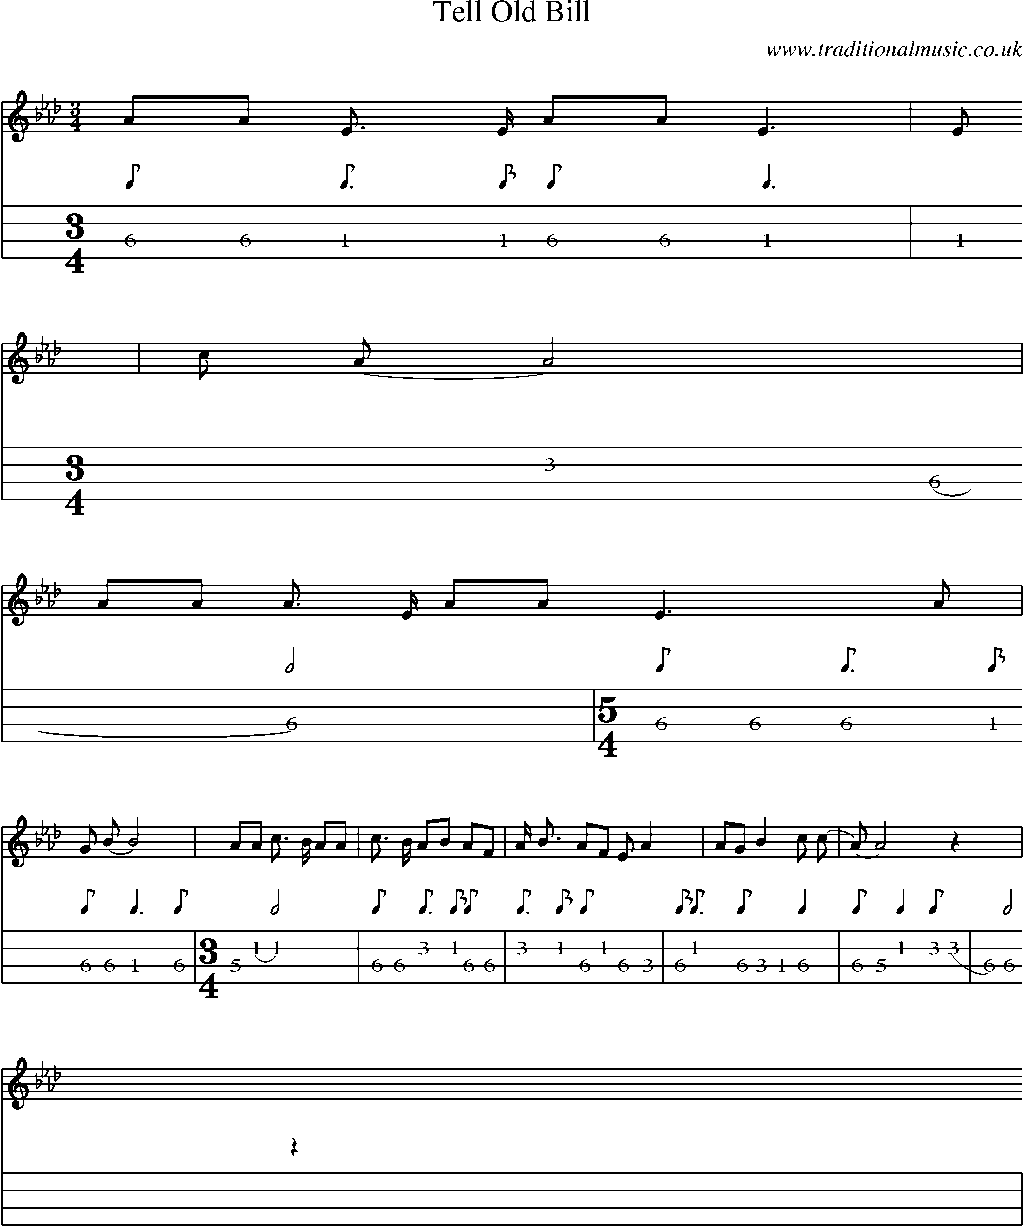 Mandolin Tab and Sheet Music for Tell Old Bill